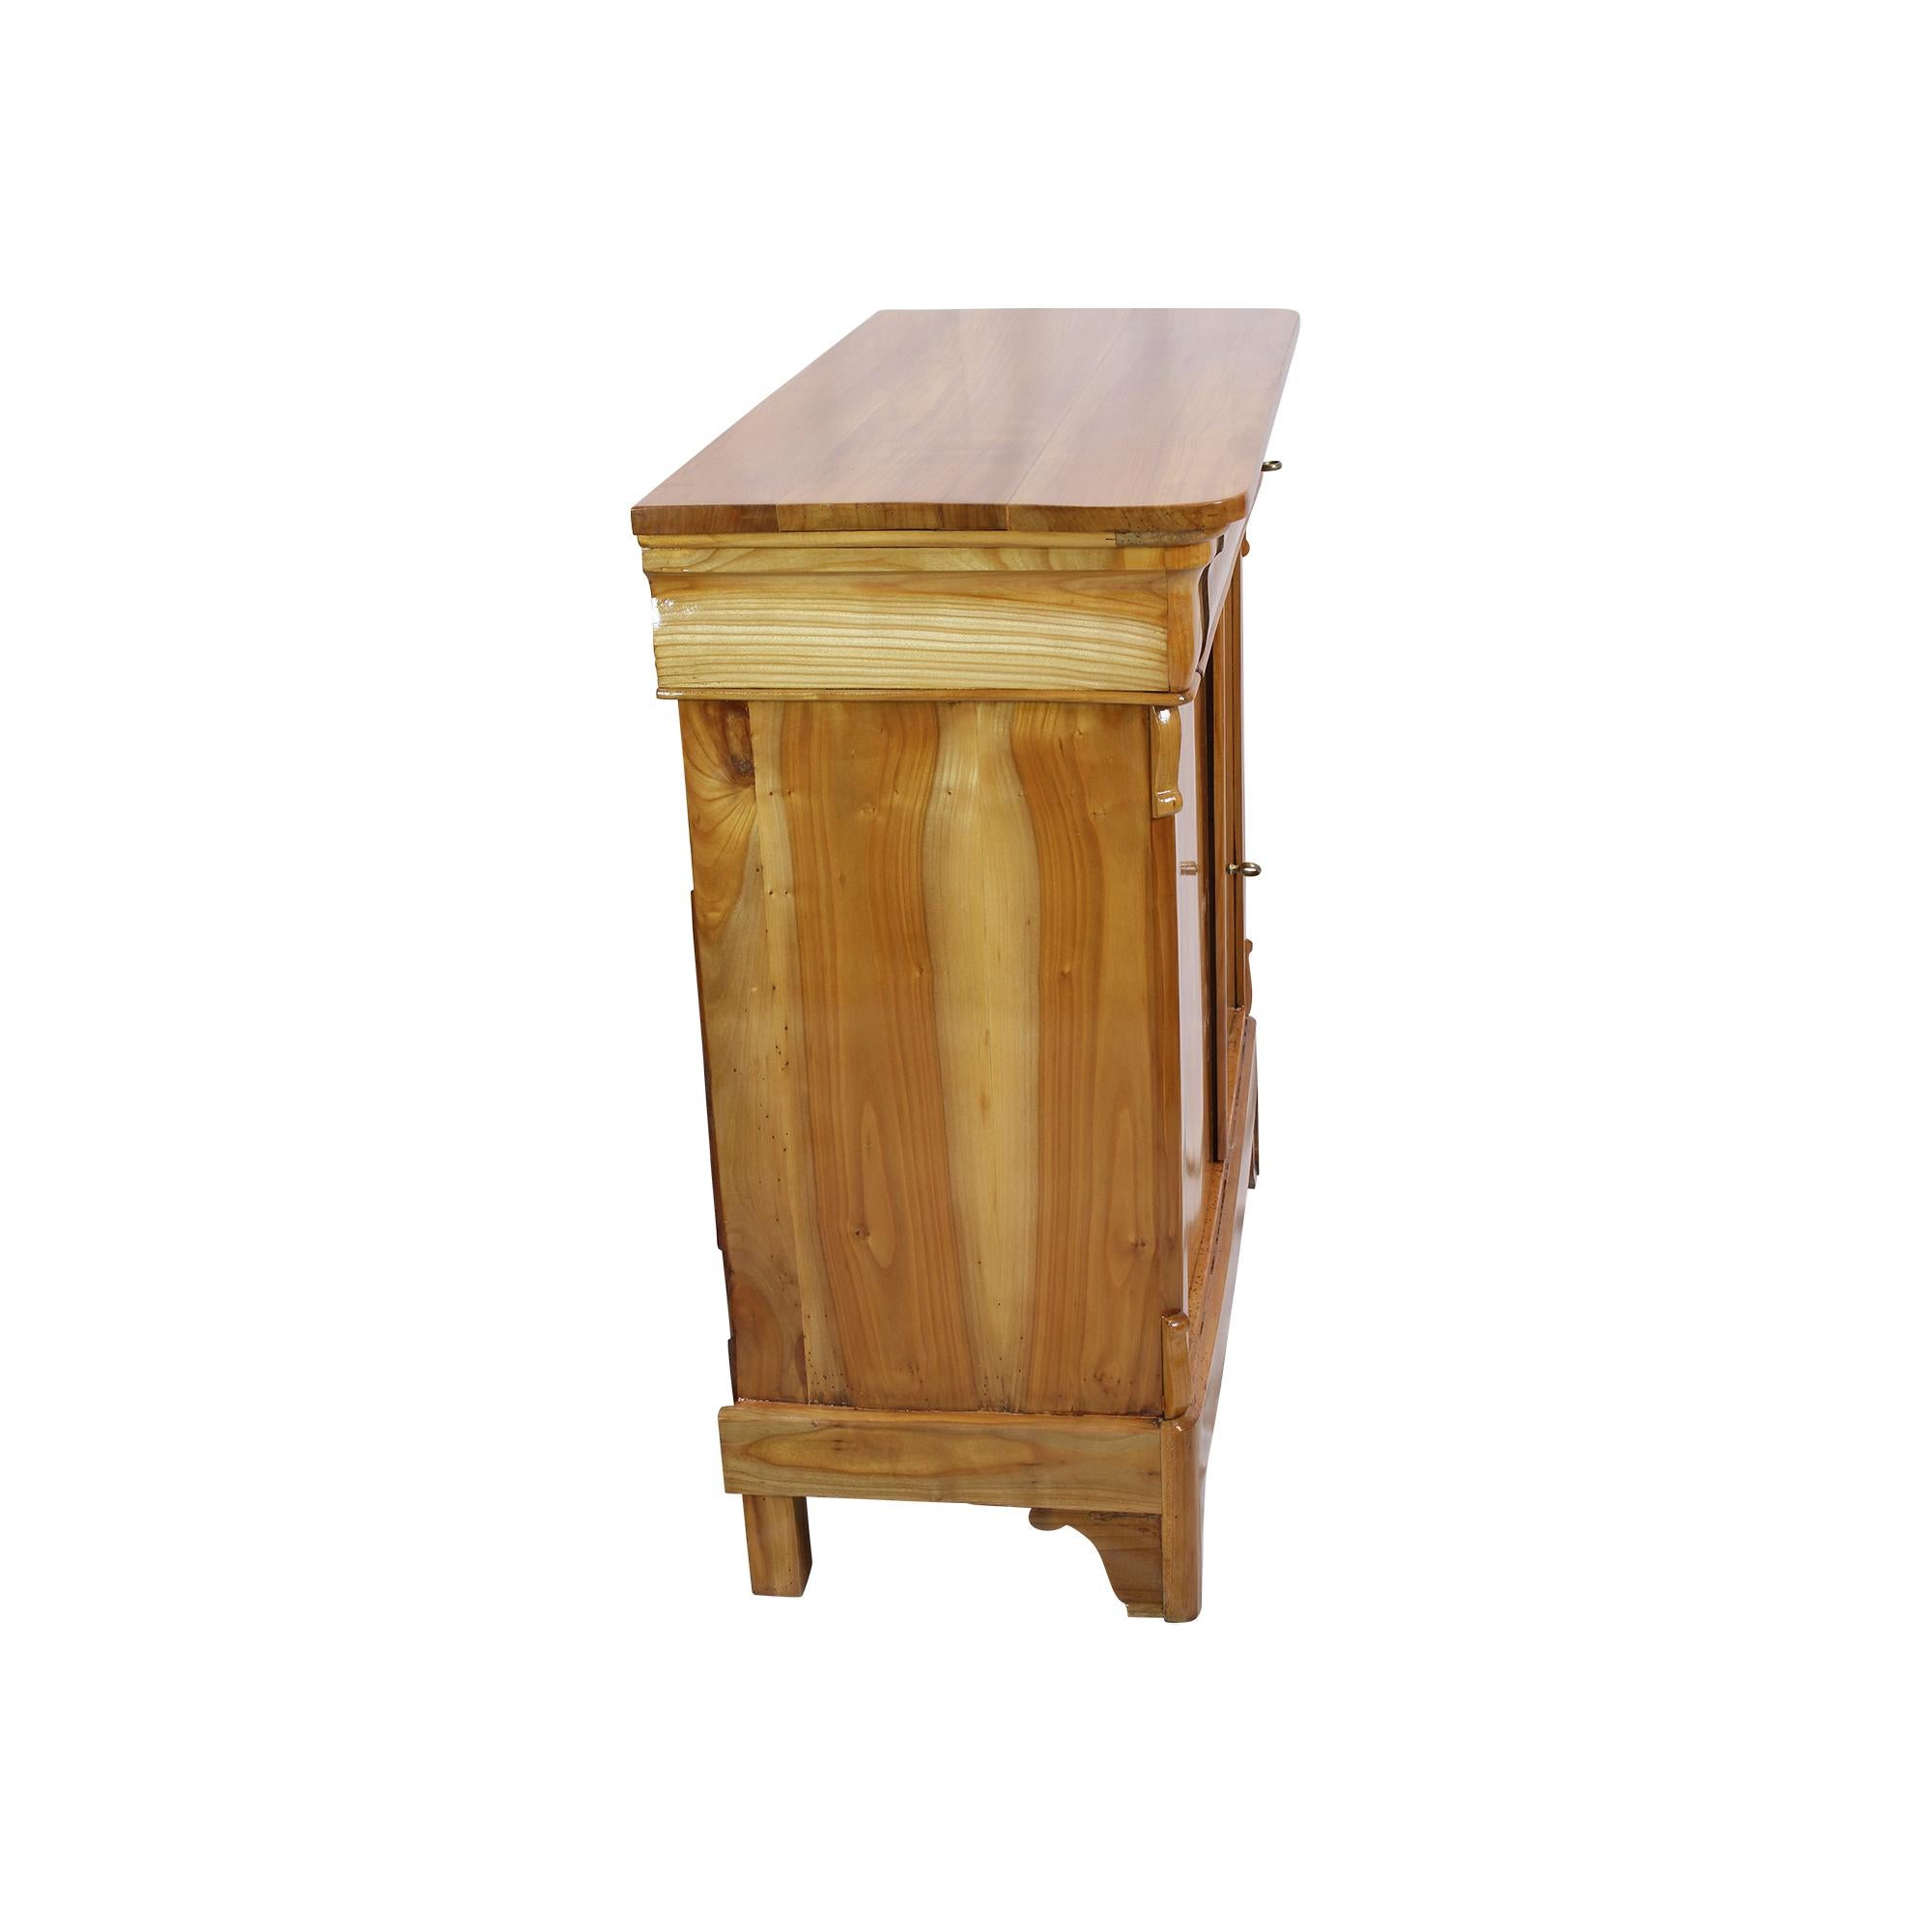 Early 19th Century Biedermeier Cherrywood Half Cabinet / Commode For Sale 5